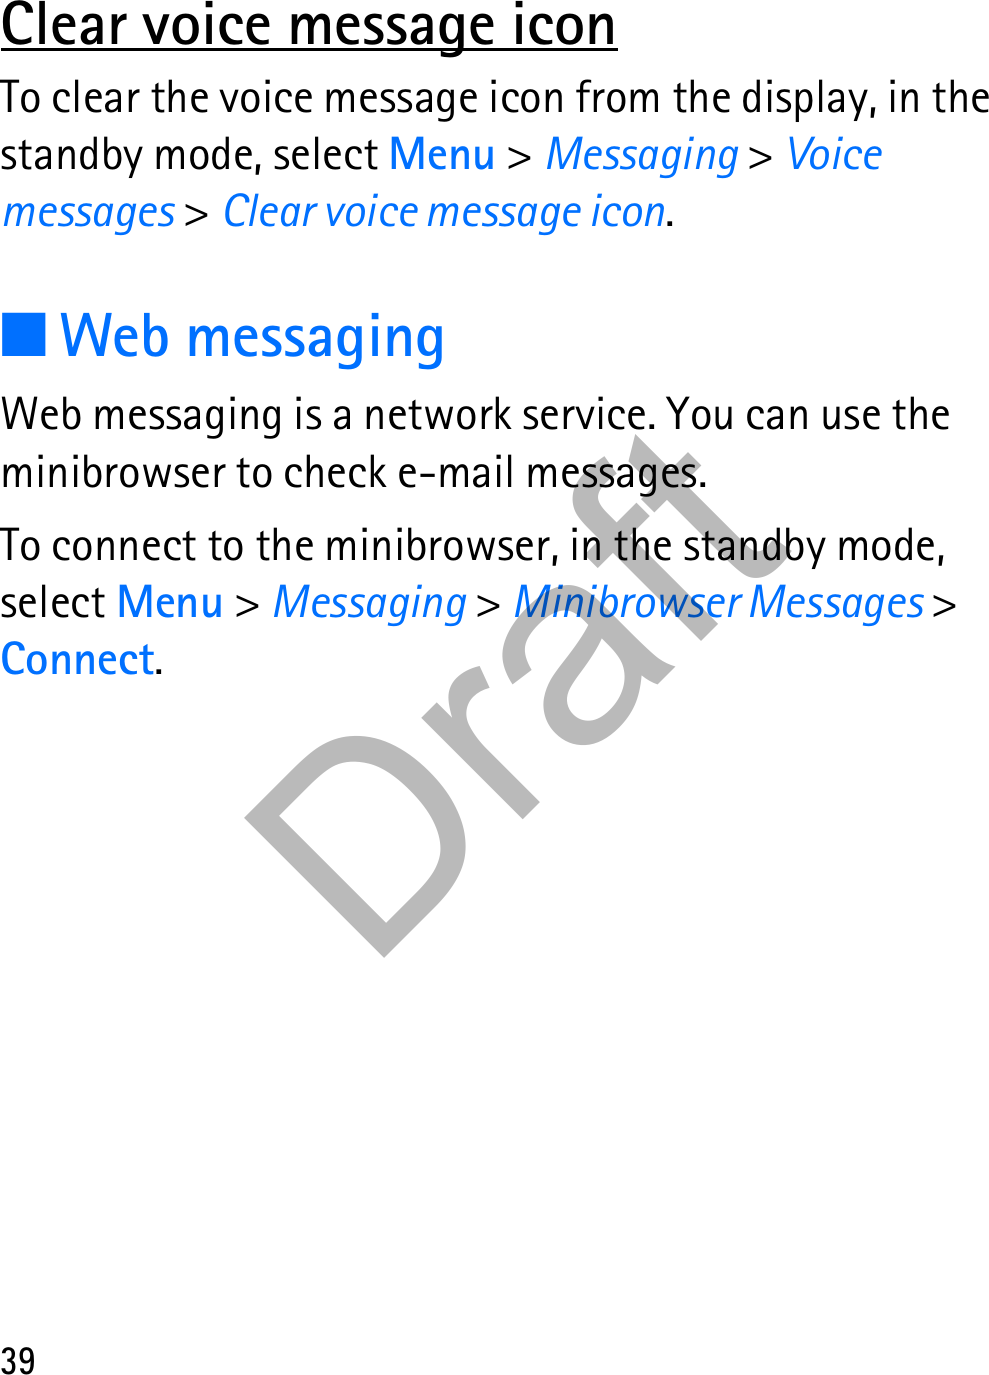 39Clear voice message iconTo clear the voice message icon from the display, in the standby mode, select Menu &gt; Messaging &gt; Voice messages &gt; Clear voice message icon.■Web messagingWeb messaging is a network service. You can use the minibrowser to check e-mail messages.To connect to the minibrowser, in the standby mode, select Menu &gt; Messaging &gt; Minibrowser Messages &gt; Connect.Draft